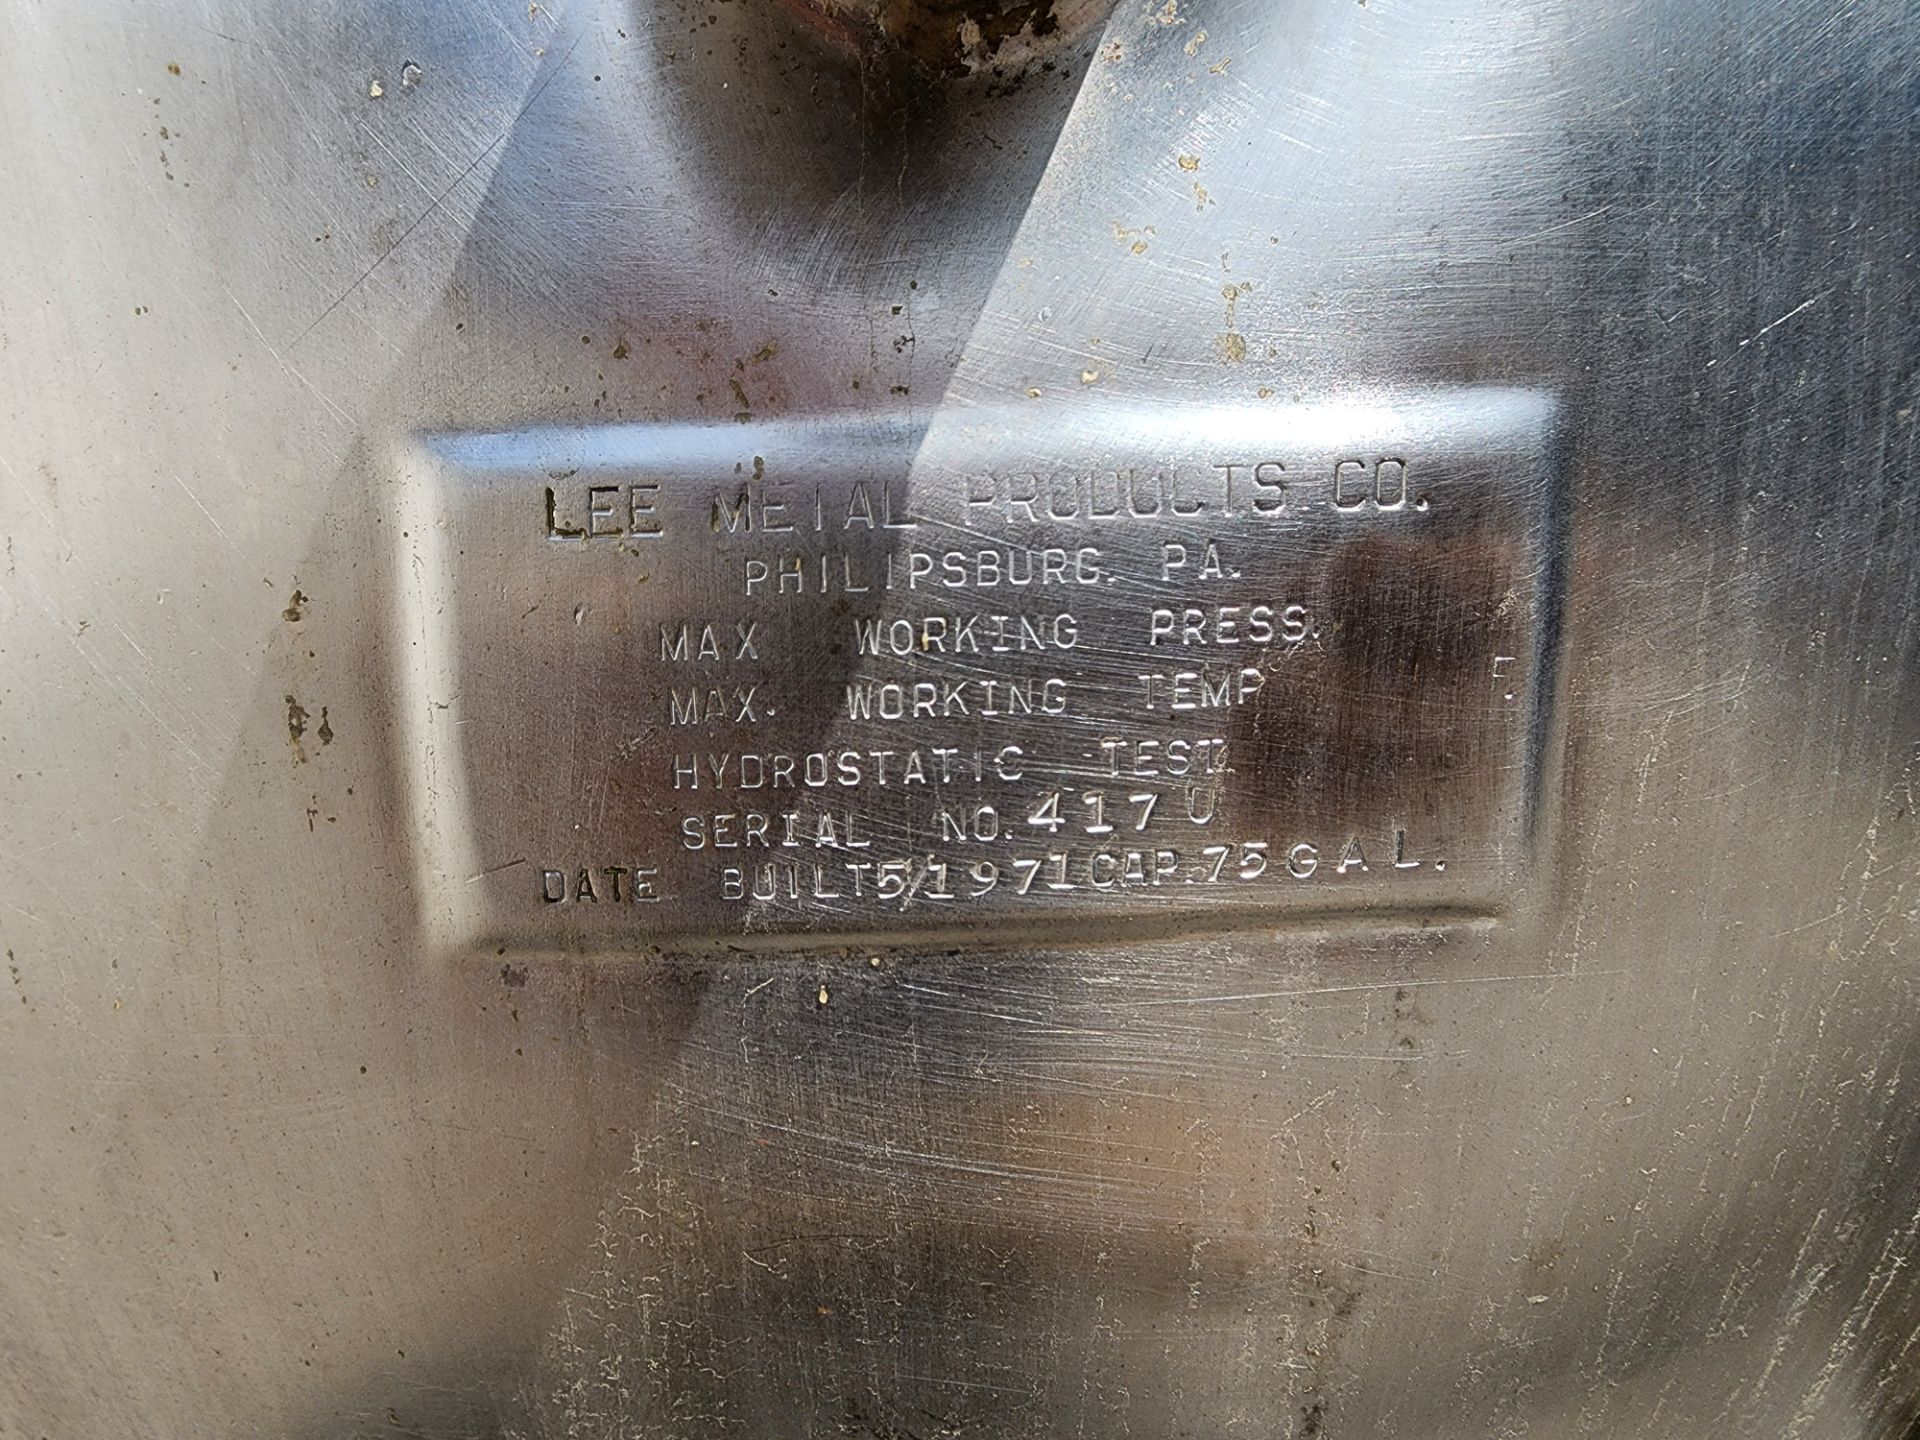 Lee Steam Fired Jacketed Kettle, Model 75D, SN 417 U, 75 Gallon Capacity. - Image 5 of 8